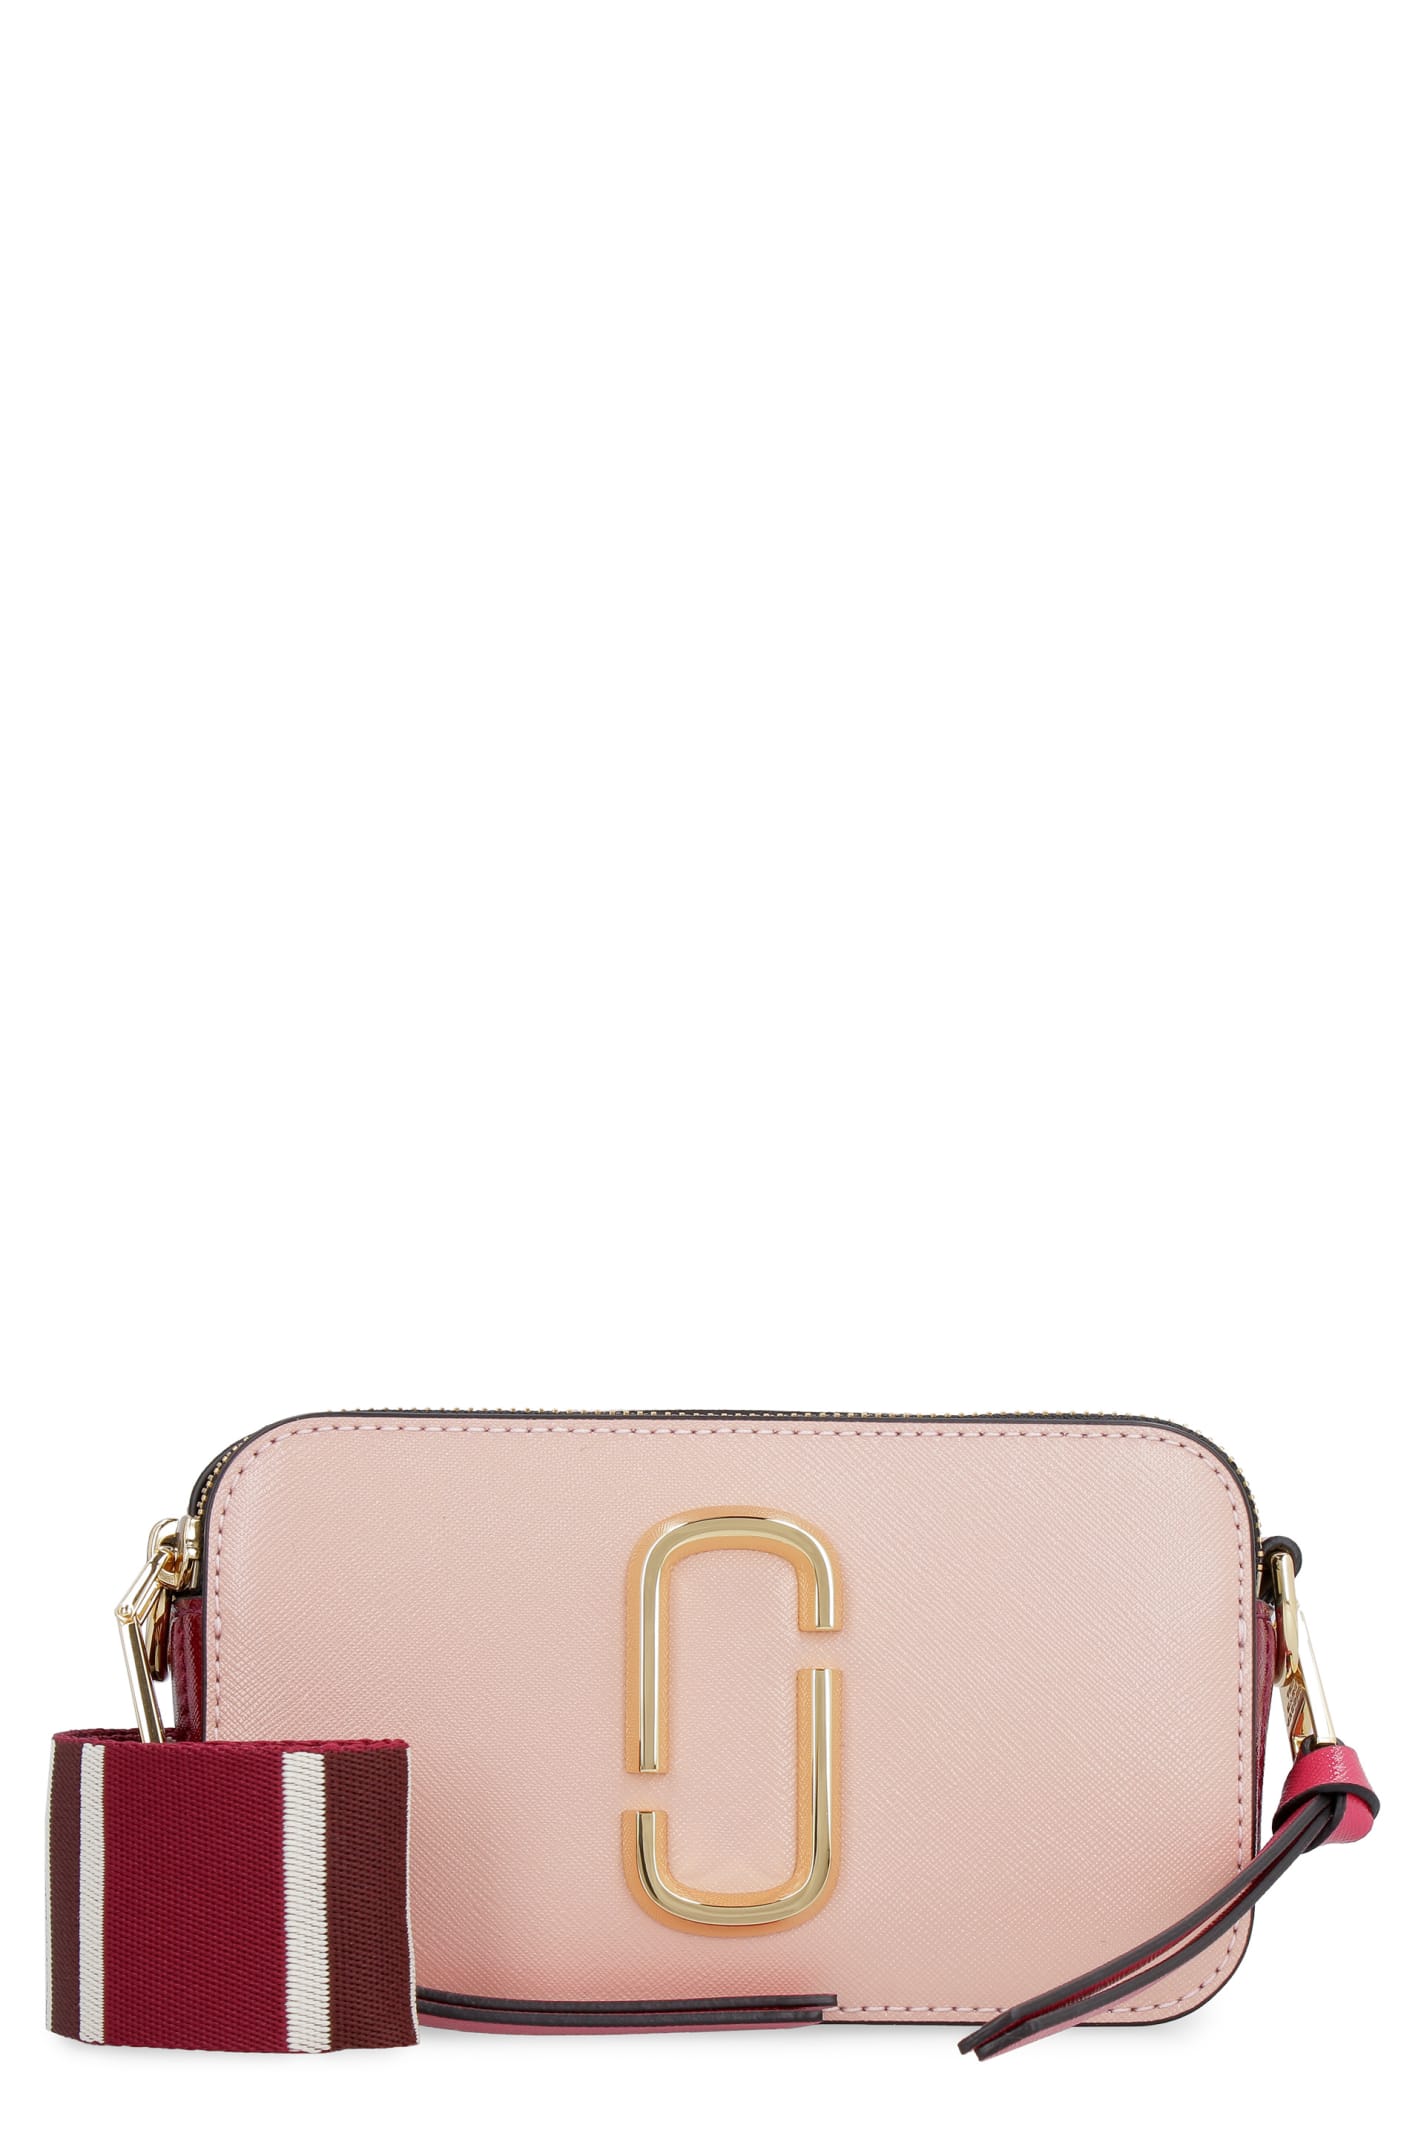 Marc Jacobs Snapshot Leather Mini Crossbody Bag In Pink